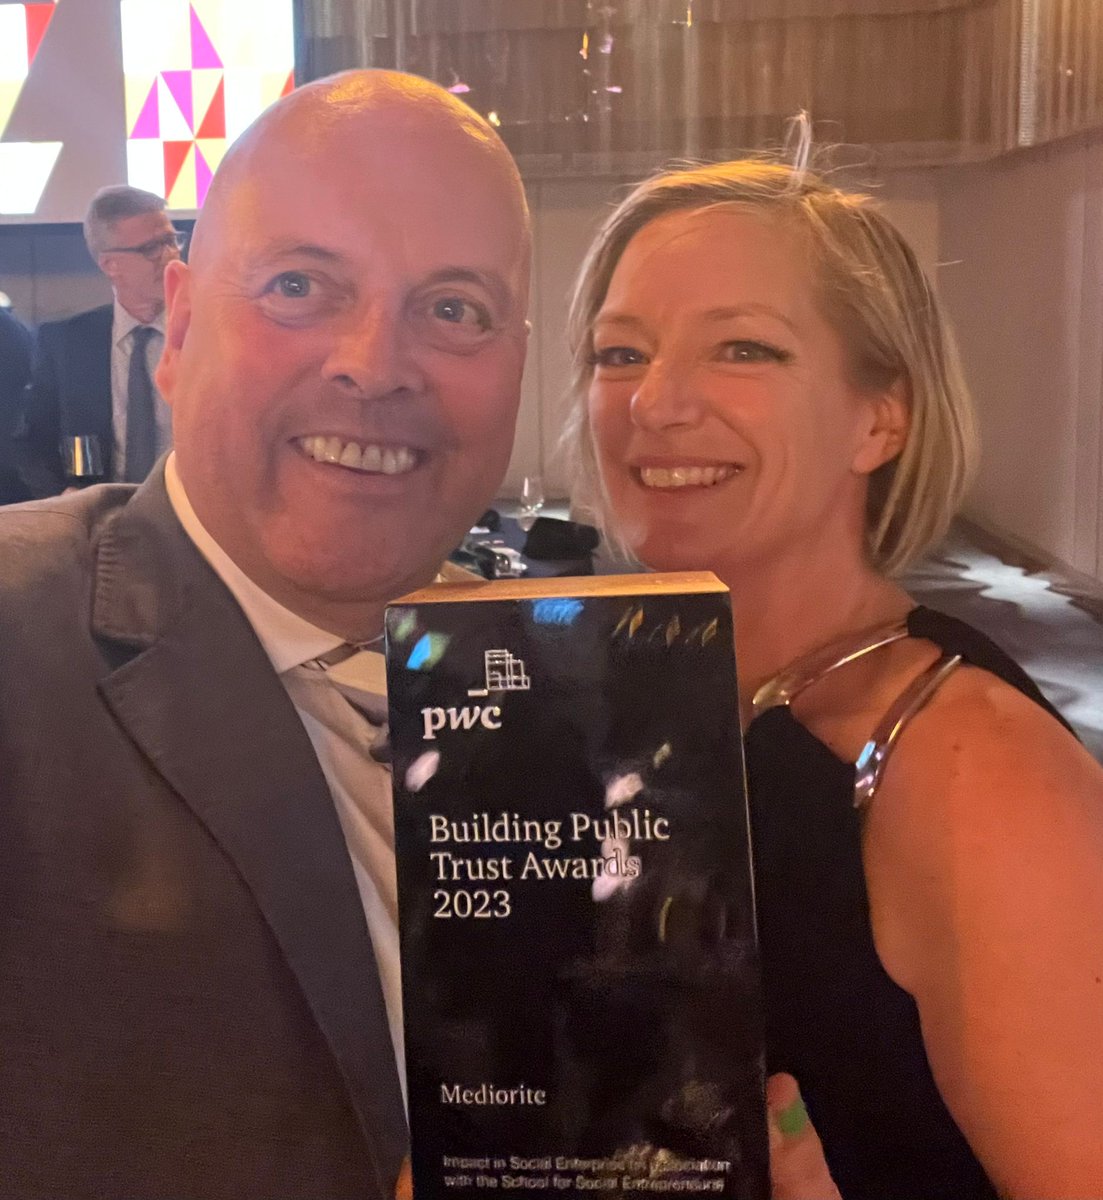 We are so proud to share that last night we won a @PwC_UK #BuildingPublicTrustAward for impact in social enterprise. Thanks to #PwCSocialEntrepreneursClub @davidradair and @SchSocEnt